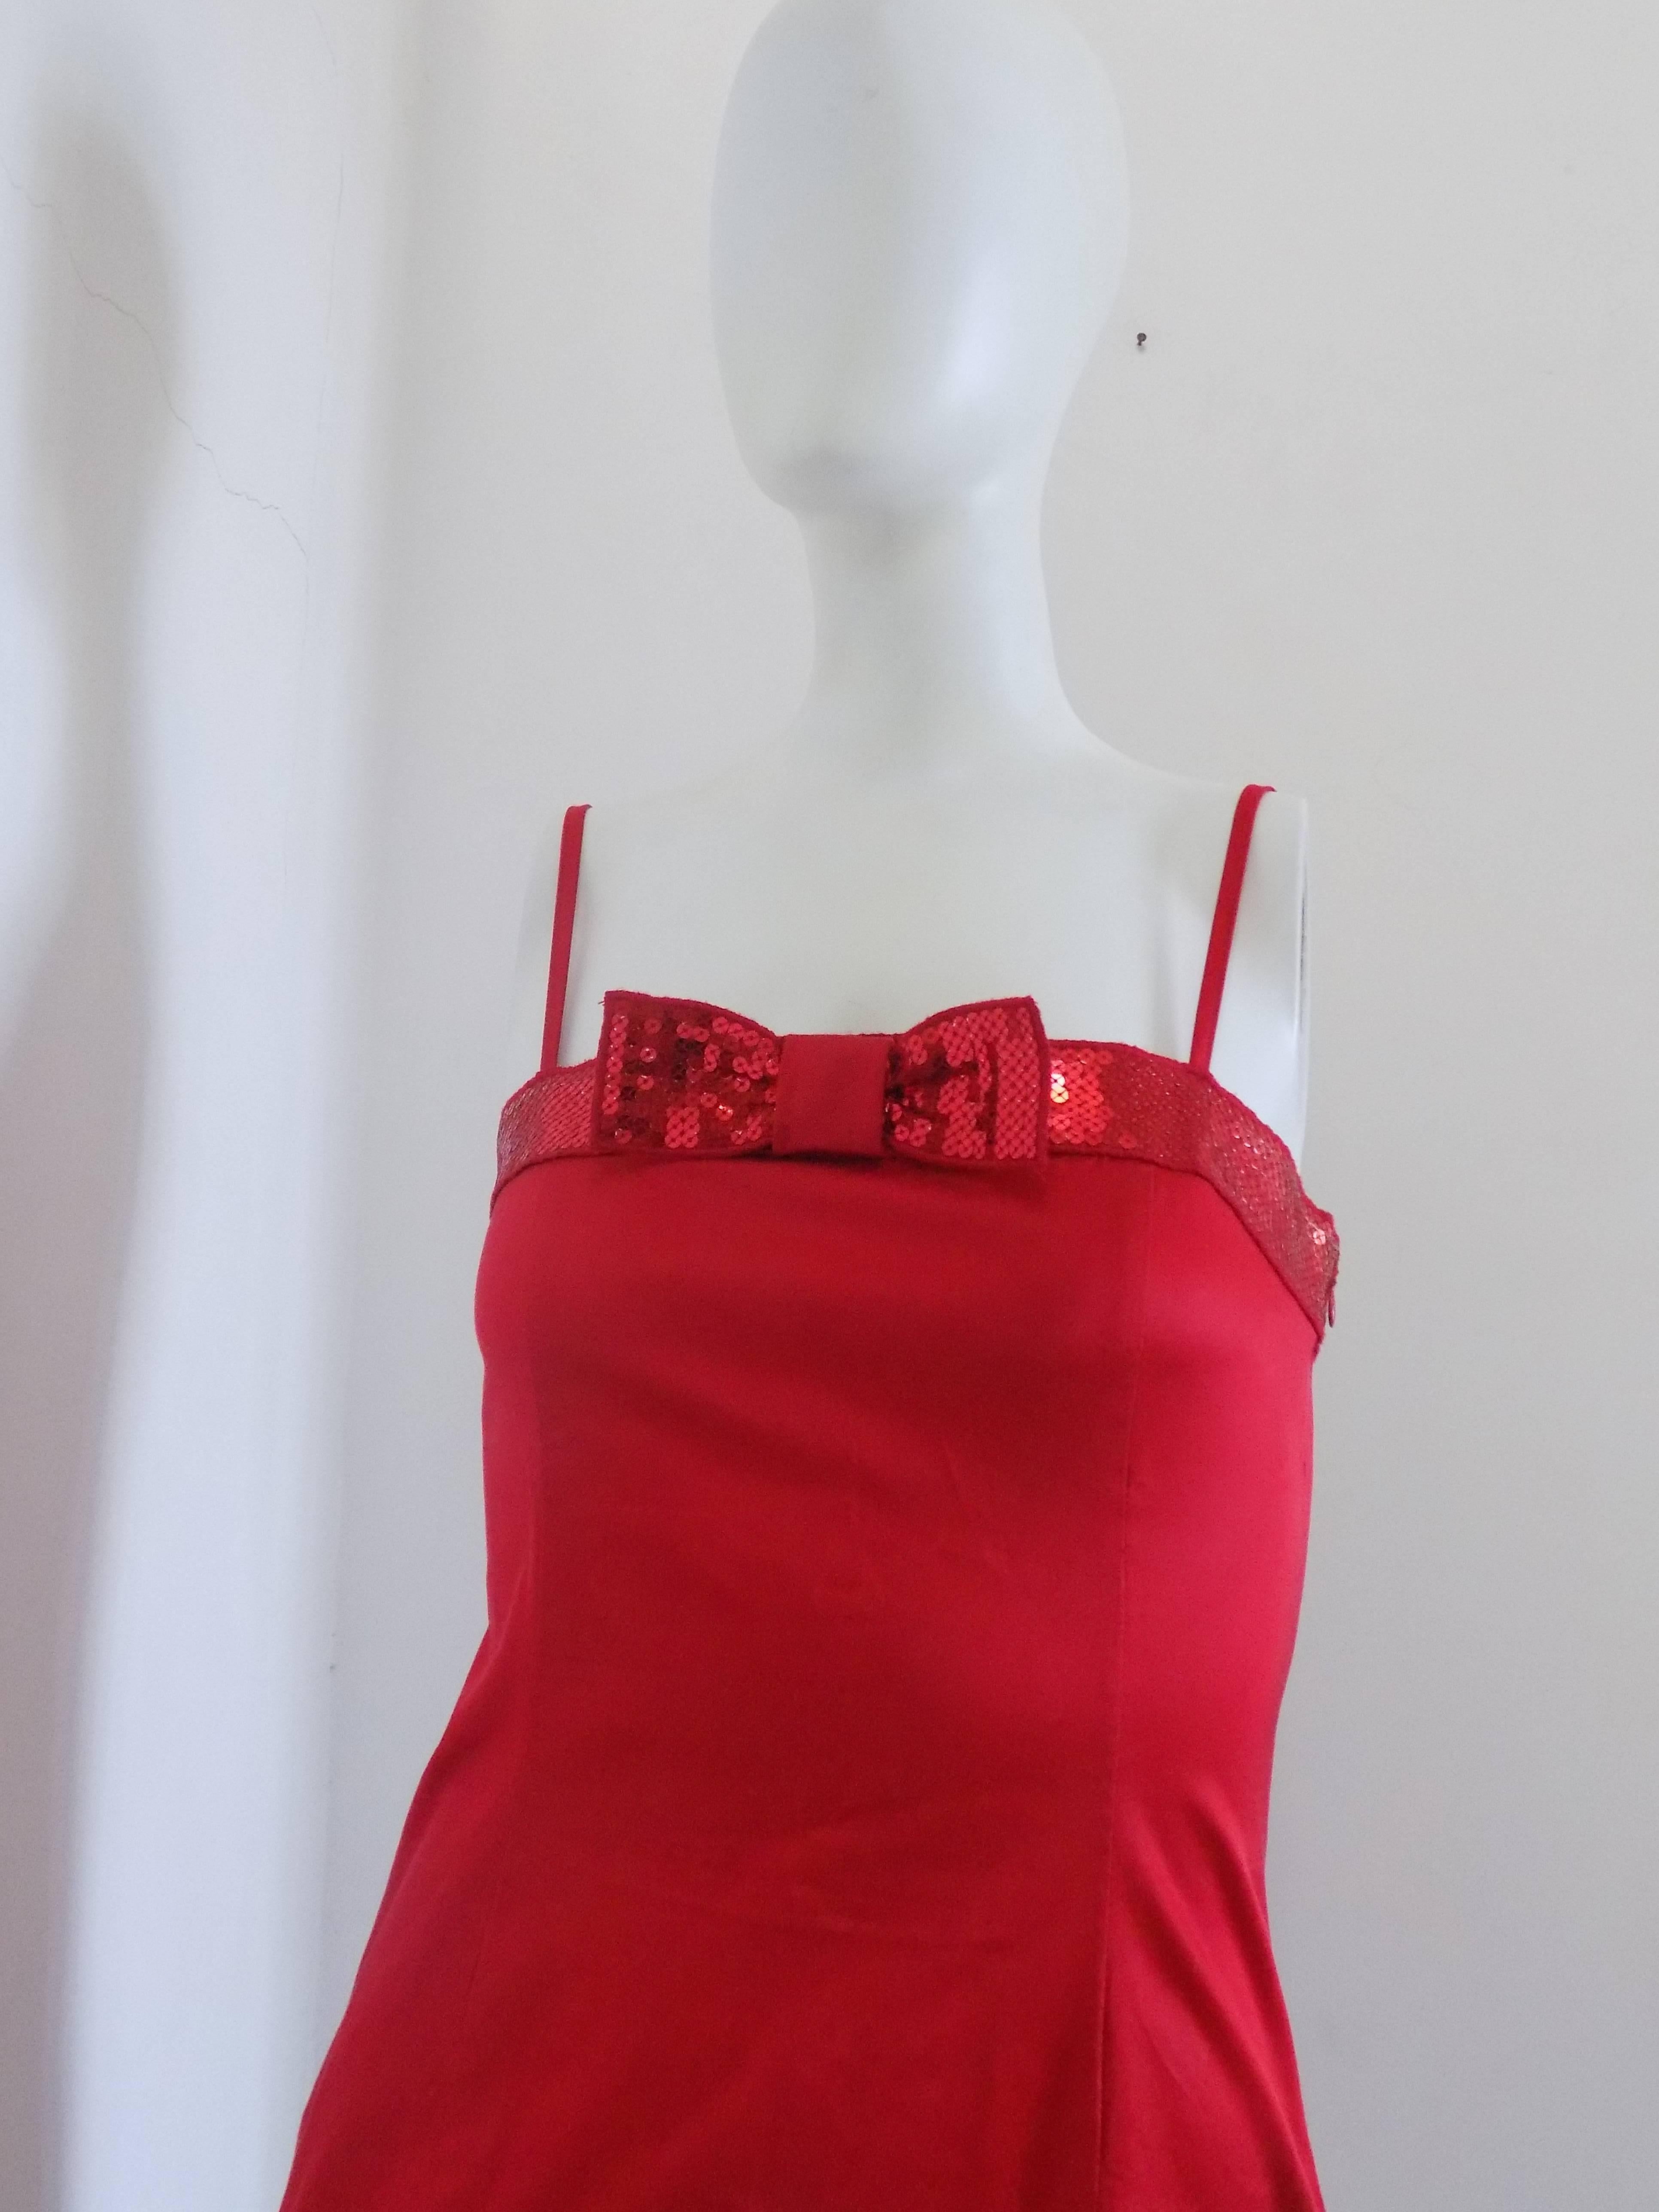 1990s Moschino Jeans red sequins dress

Totally made in italy in italian size range 44 but fits smaller